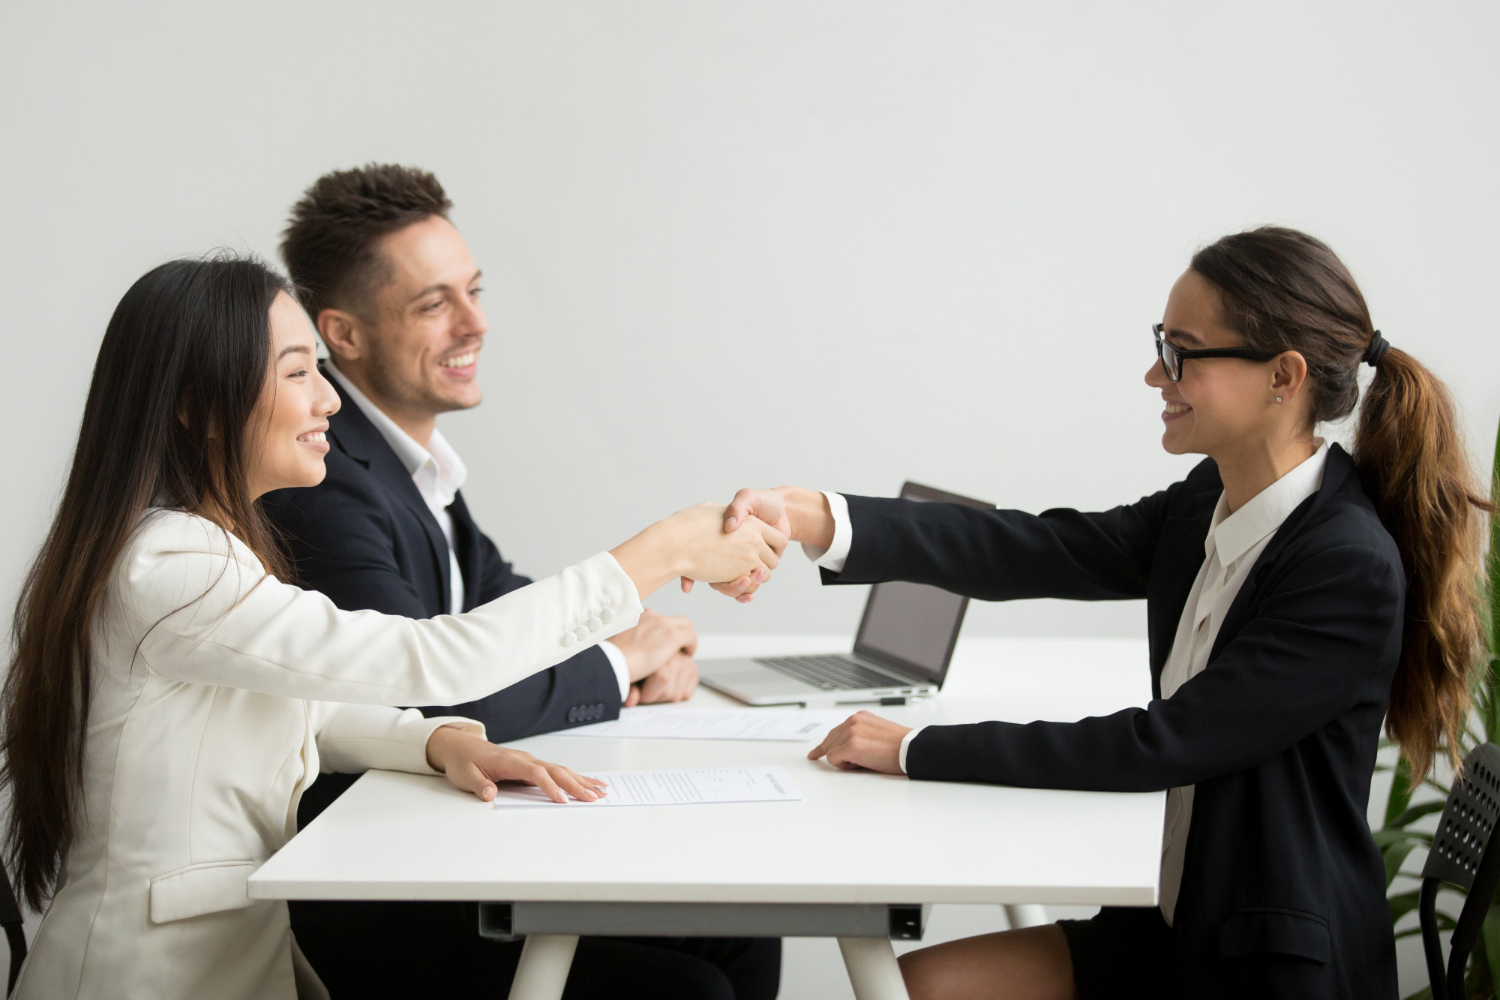 <a href="https://www.freepik.com/free-photo/smiling-diverse-businesswomen-shake-hands-group-meeting-deal-concept_3952578.htm#query=hiring%20expert&position=3&from_view=search&track=ais">Image by yanalya</a> on Freepik